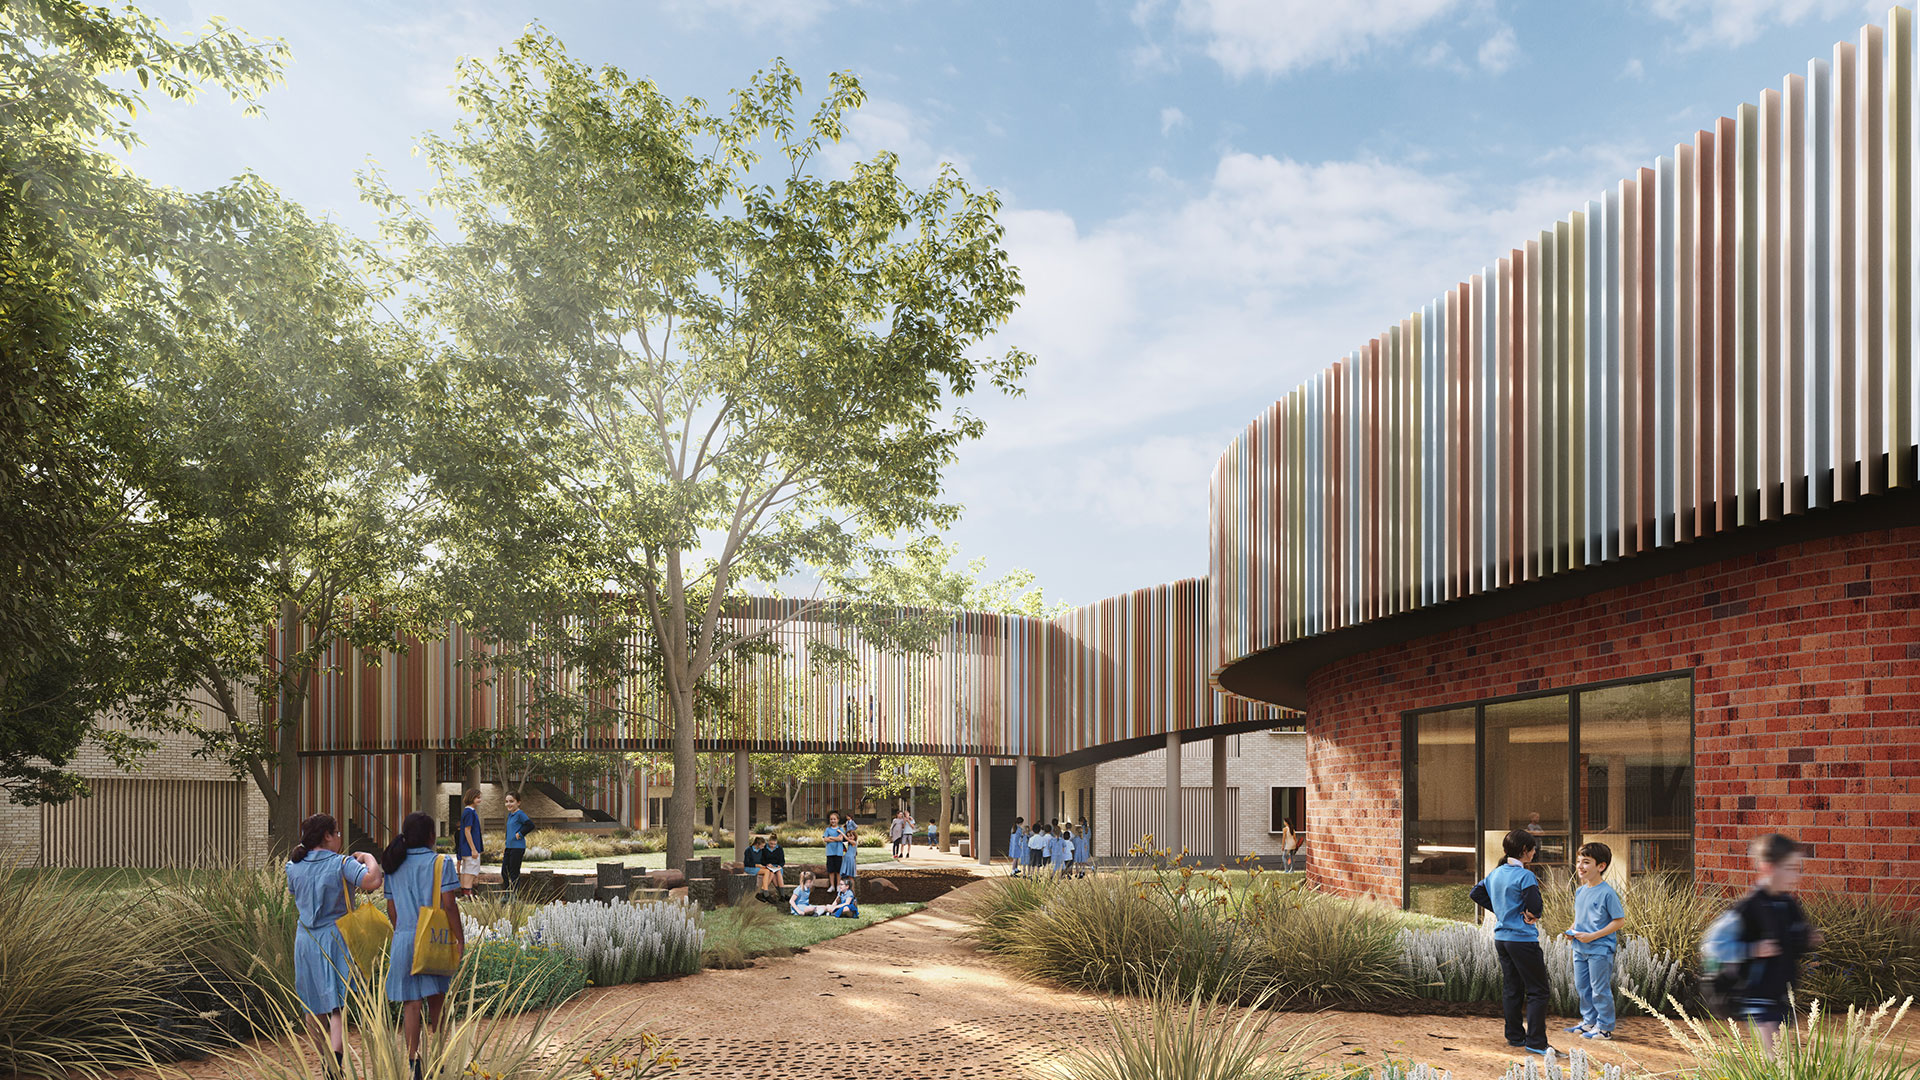 An artist's impression of how Garran Primary School will look once it is modernised.